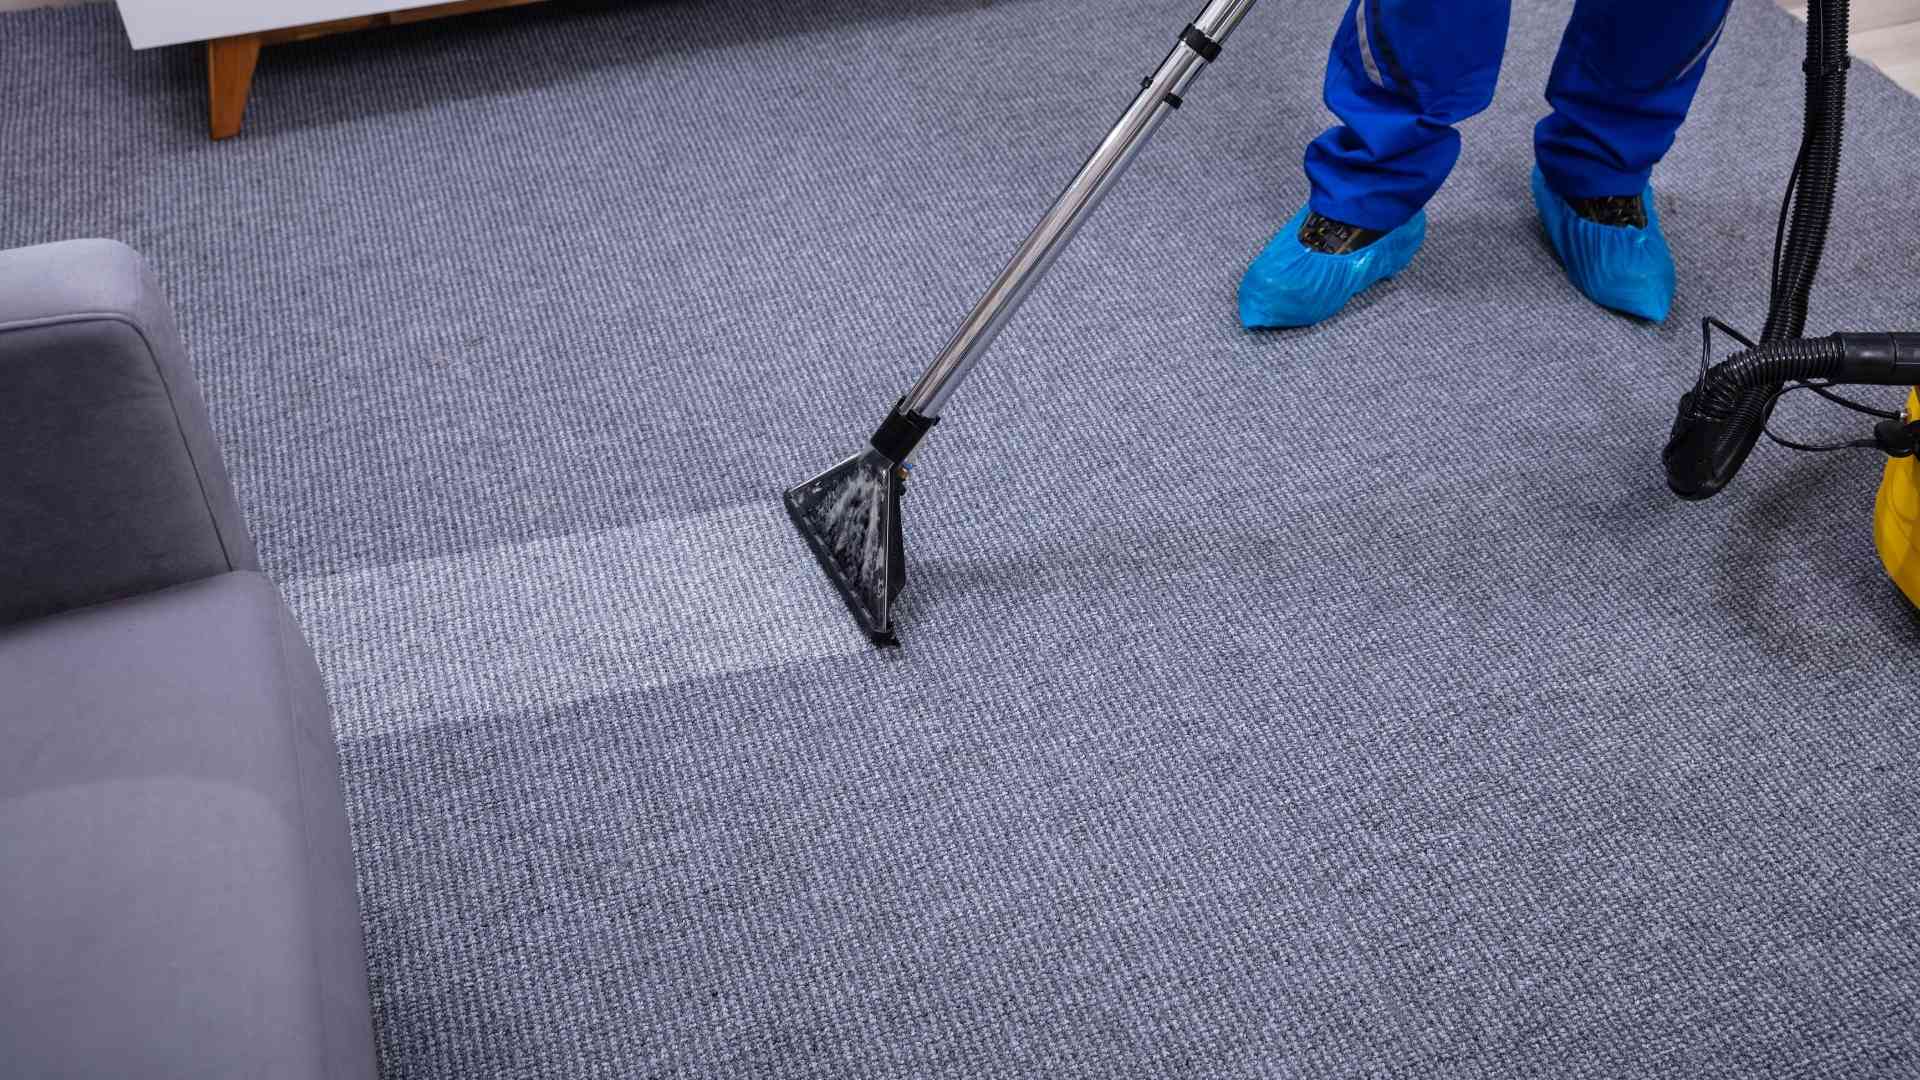 9 helpful tips to hire a carpet cleaner for your home